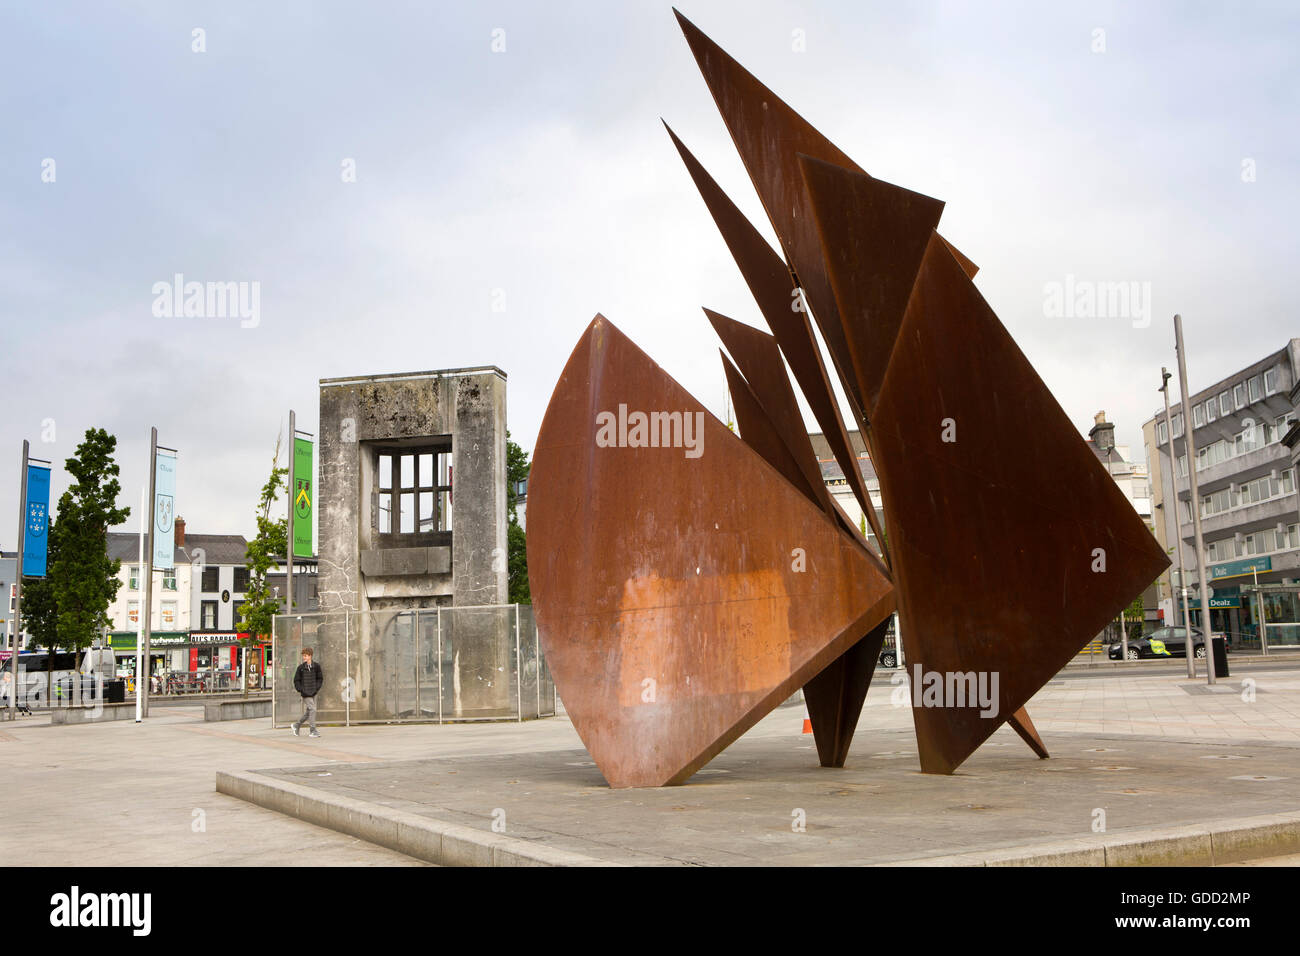 Ireland, Co Galway, Galway, Eyre Square, John Kennedy Park, metal fountain sculpture and  Browne's Gateway Stock Photo